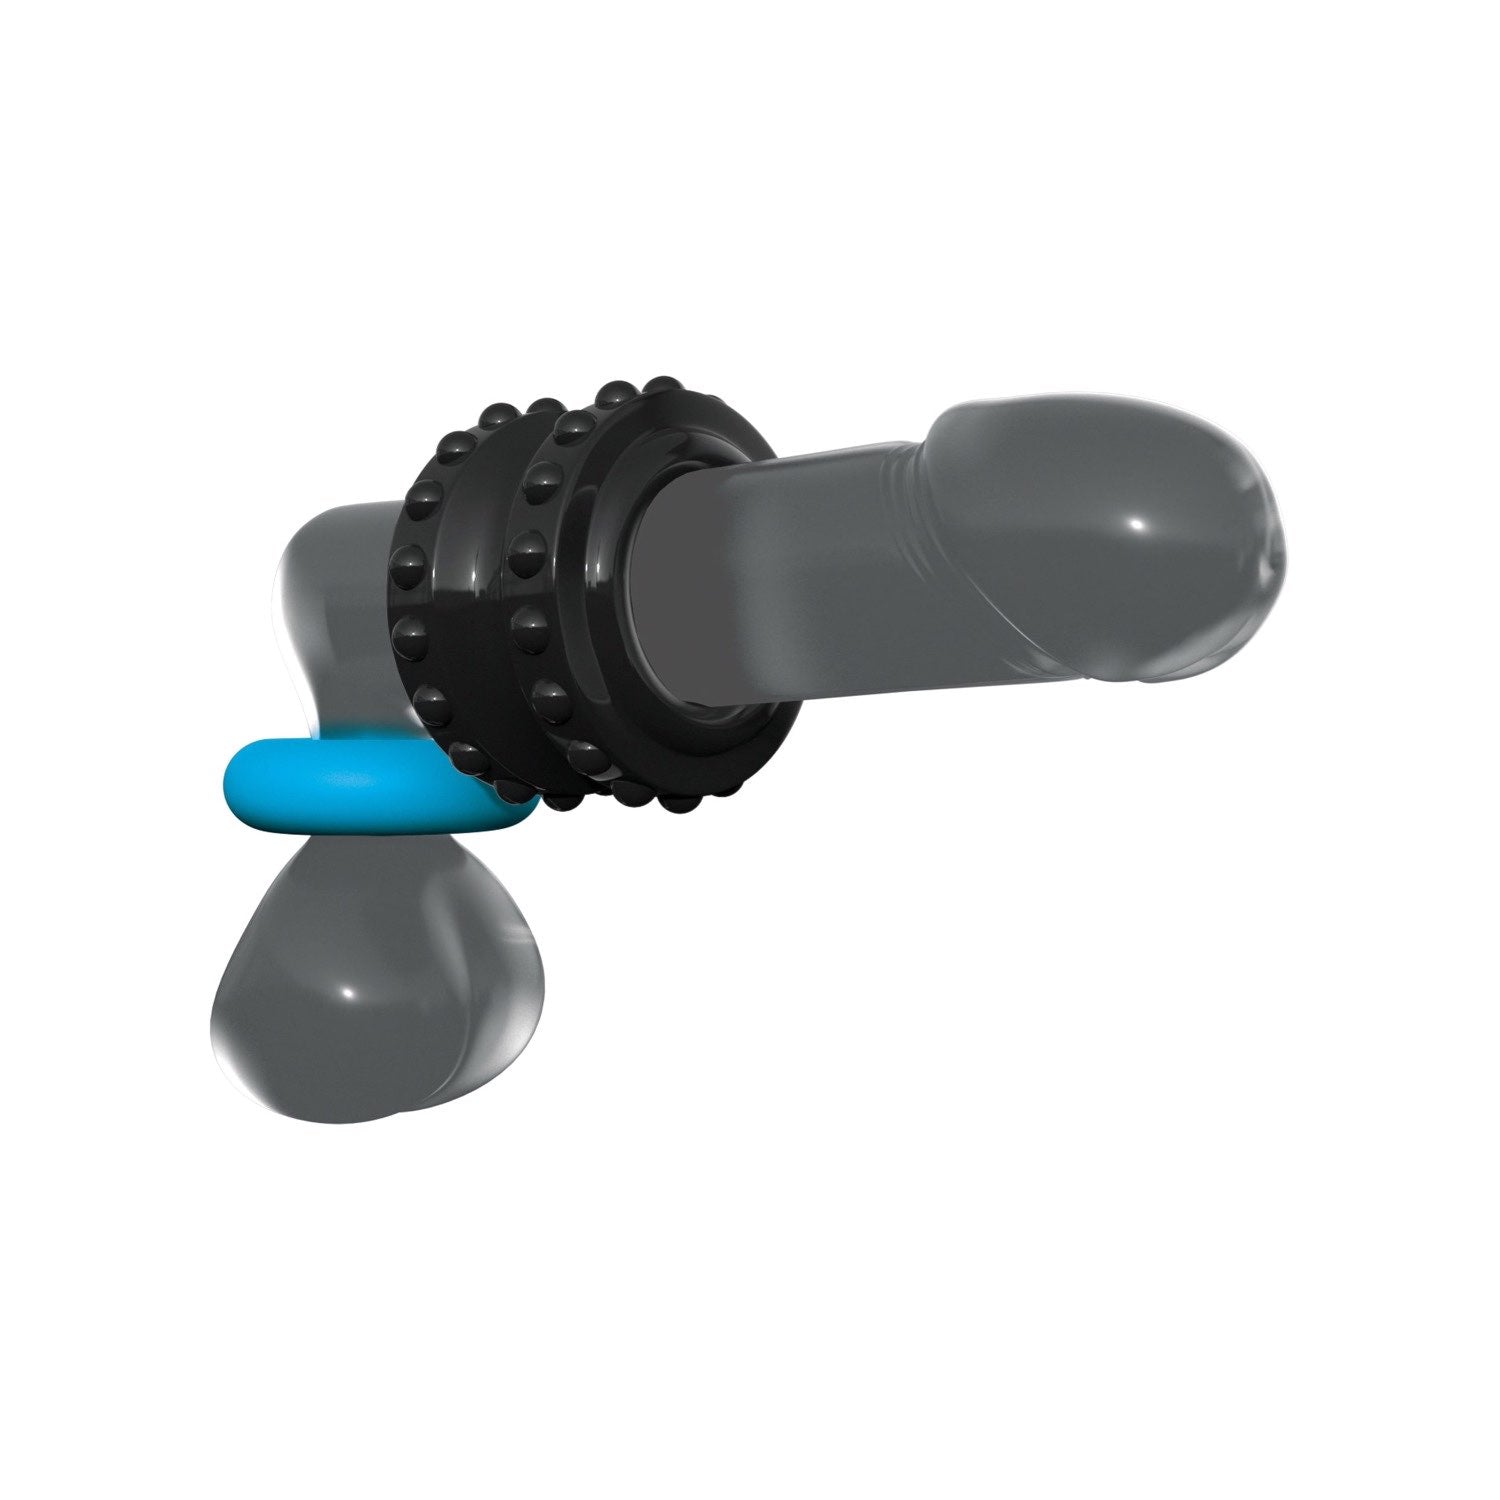 Sir Richards Pro Performance Beginners C-Ring - Black/Blue Cock Ring by Pipedream